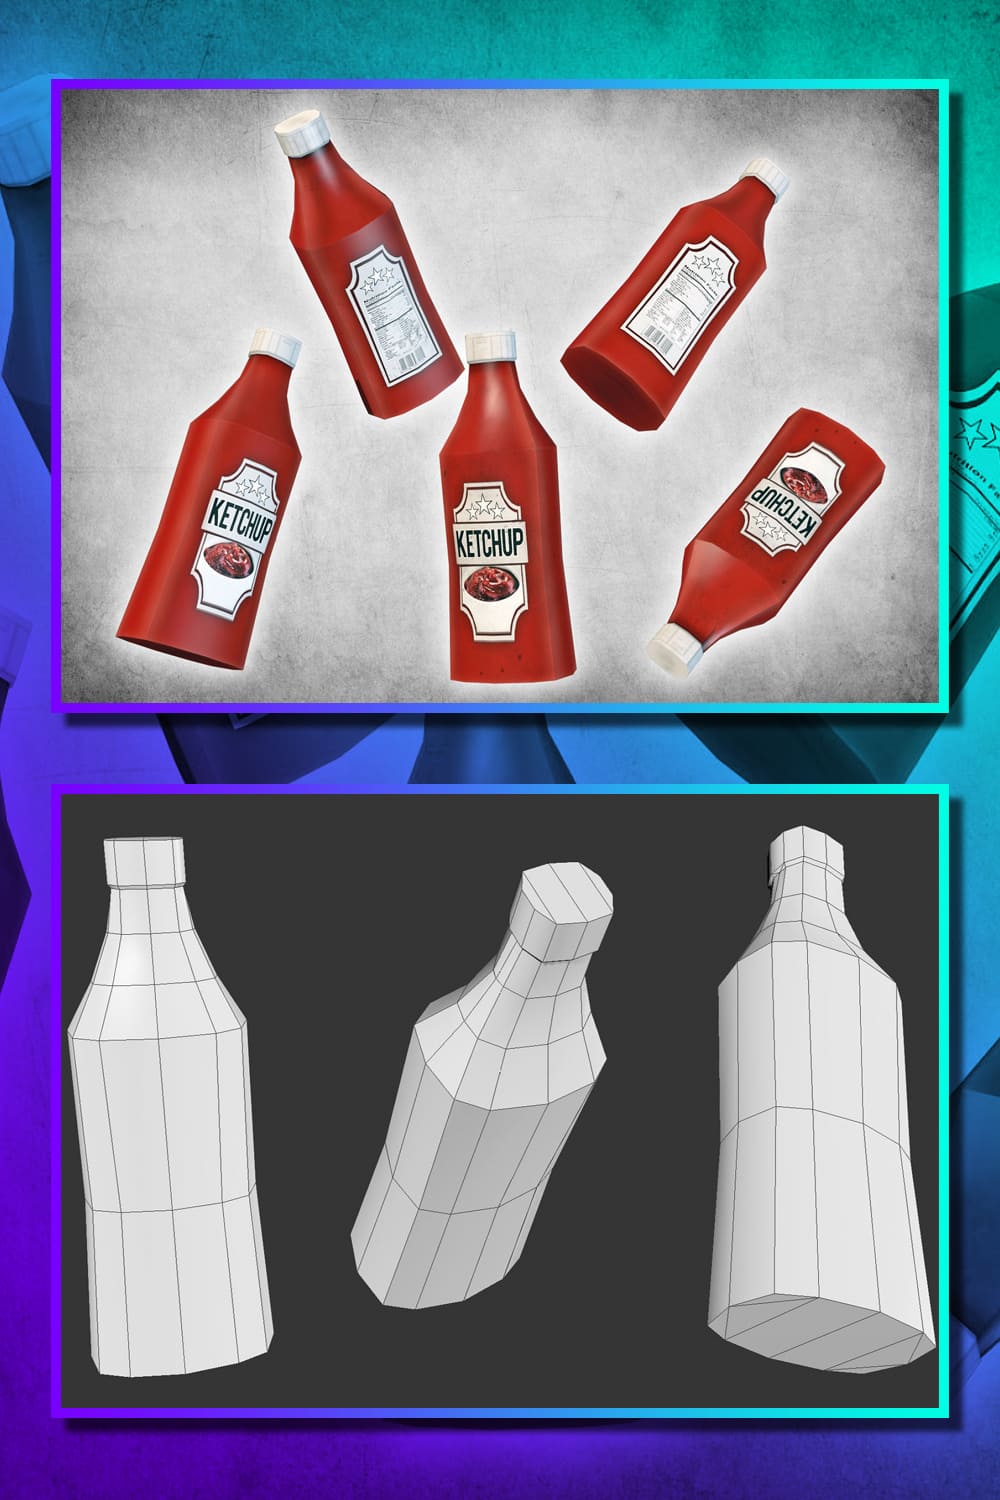 Two parallel images with plastic ketchup cans and white 3D models of ketchup cans.